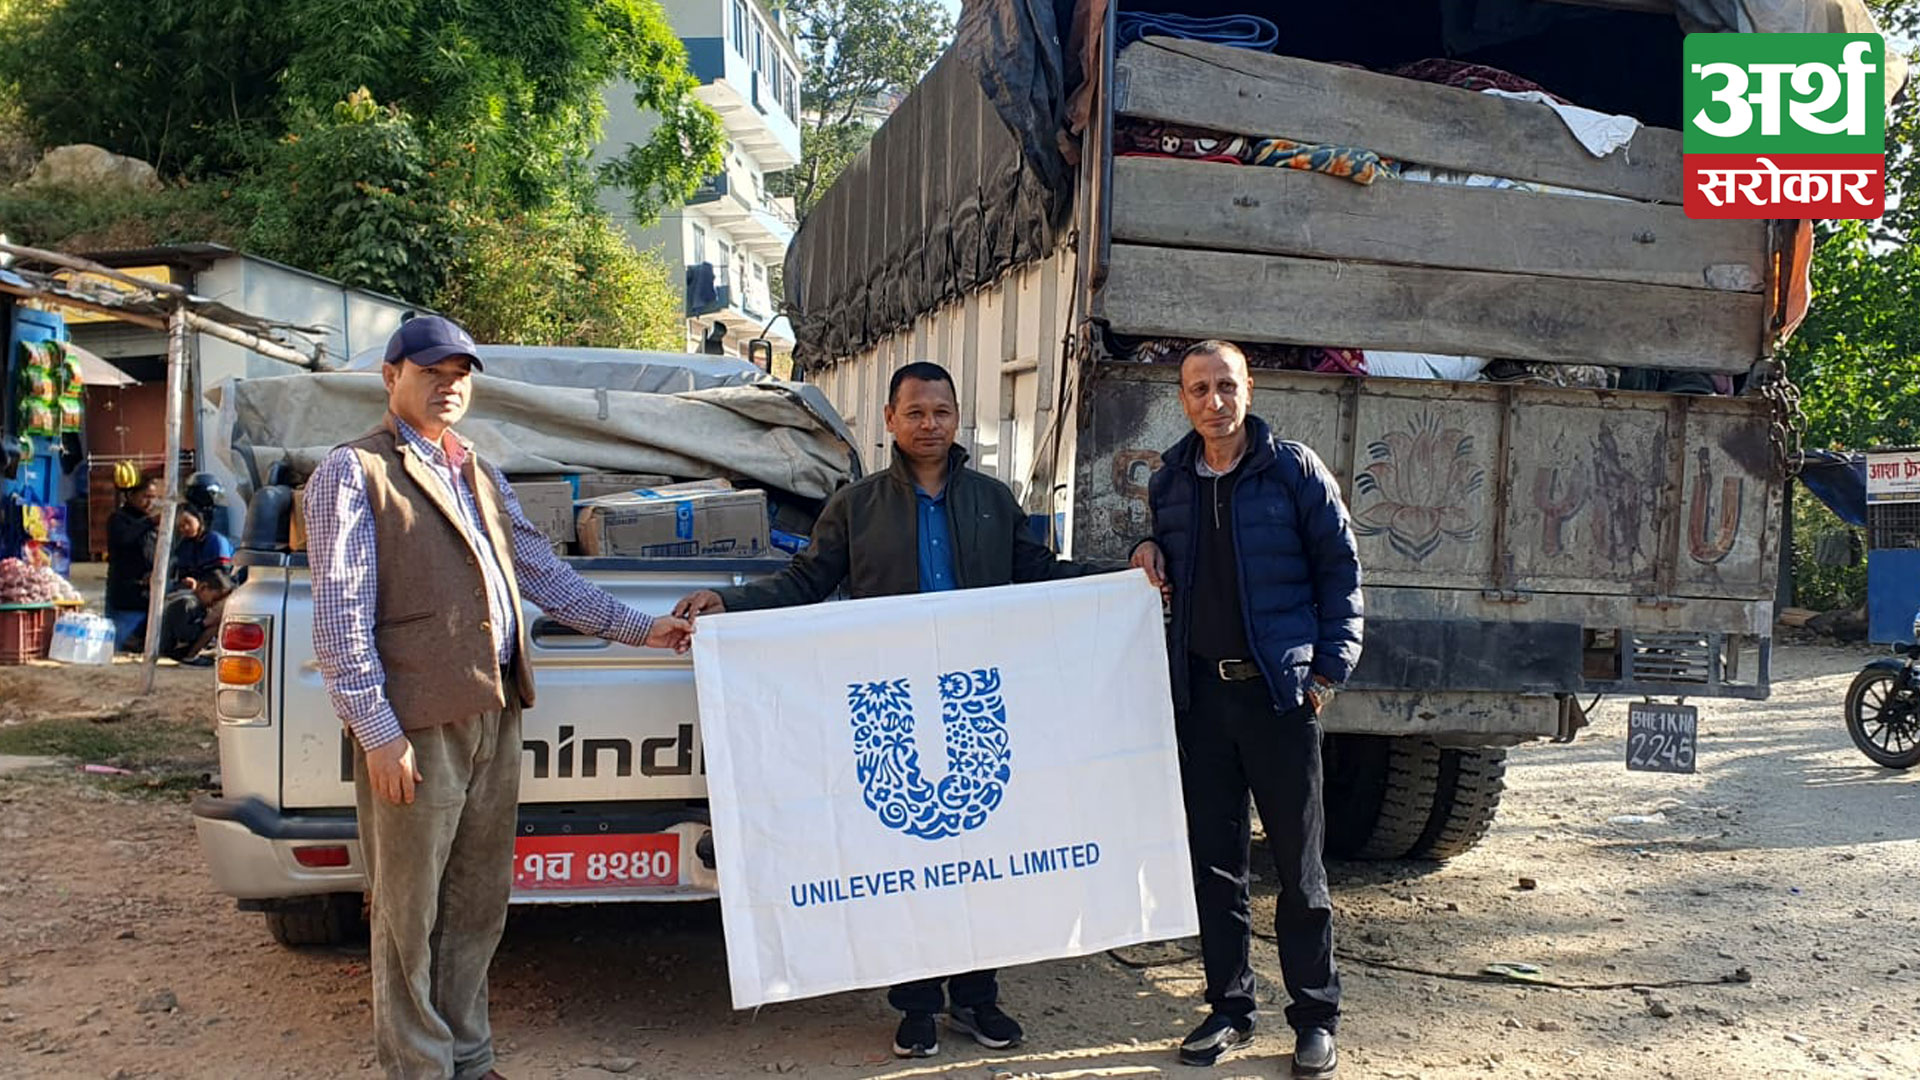 Unilever Nepal extends support to earthquake victims in western Nepal